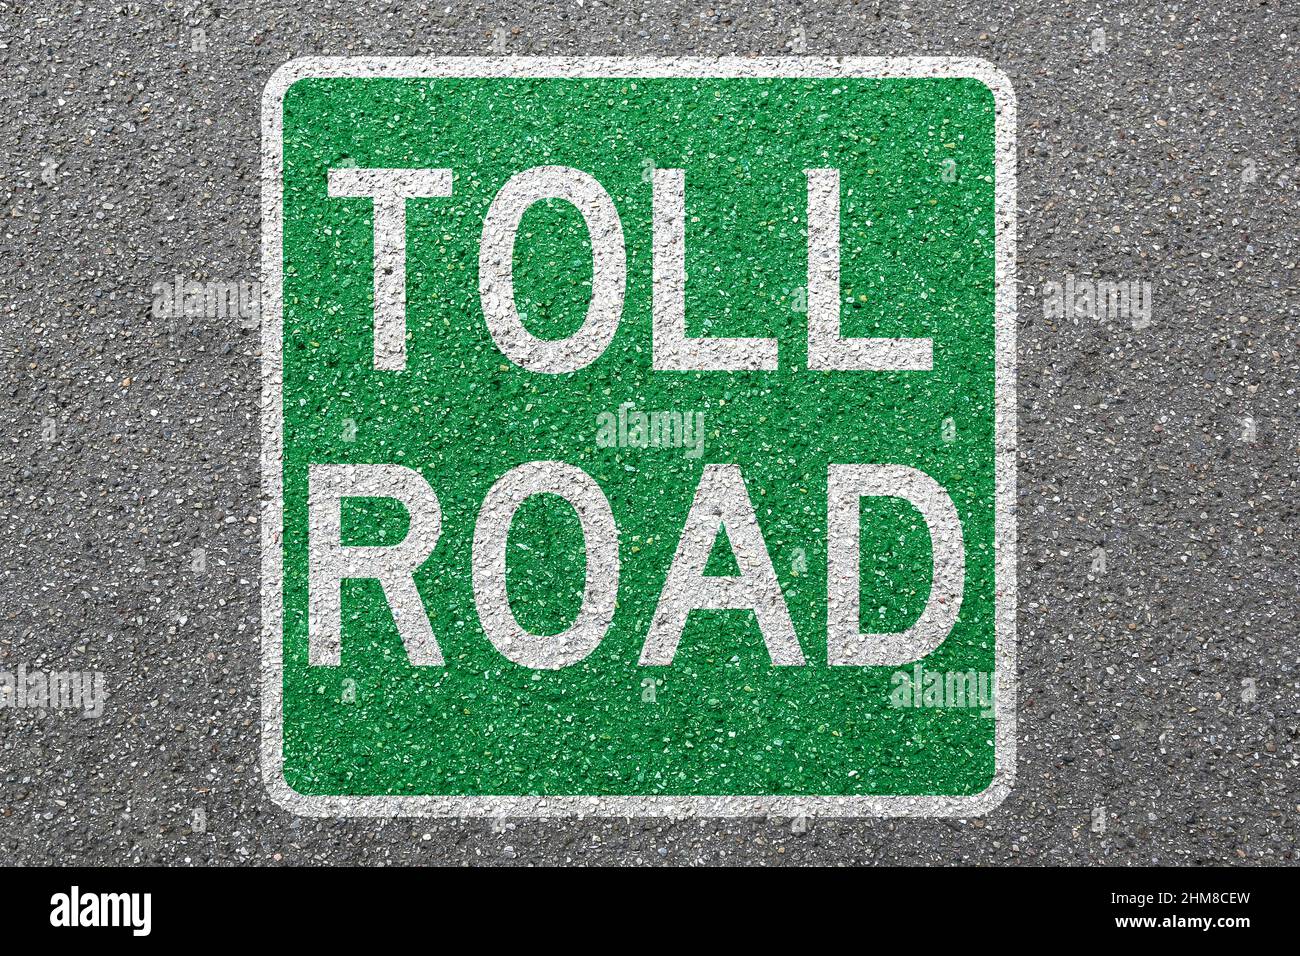 Toll road street city town pay paying money clean air highway sign zone concept Stock Photo